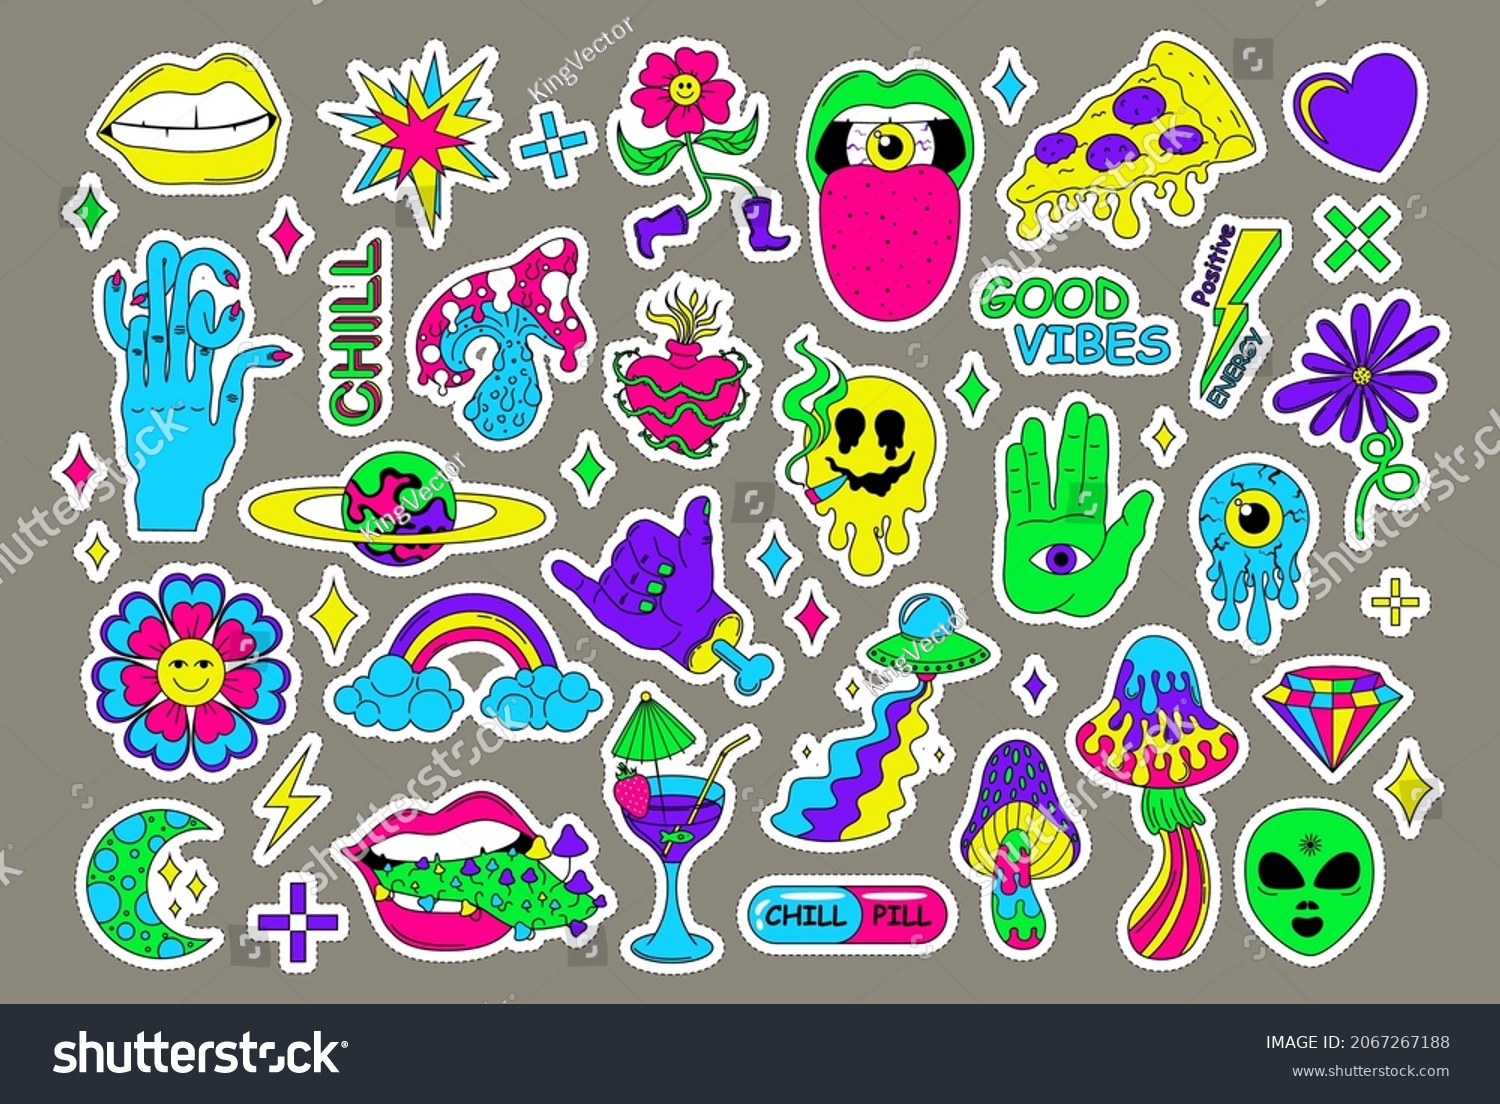 Psychedelic Surreal Abstract Neon Stickers Funny Stock Vector (Royalty ...